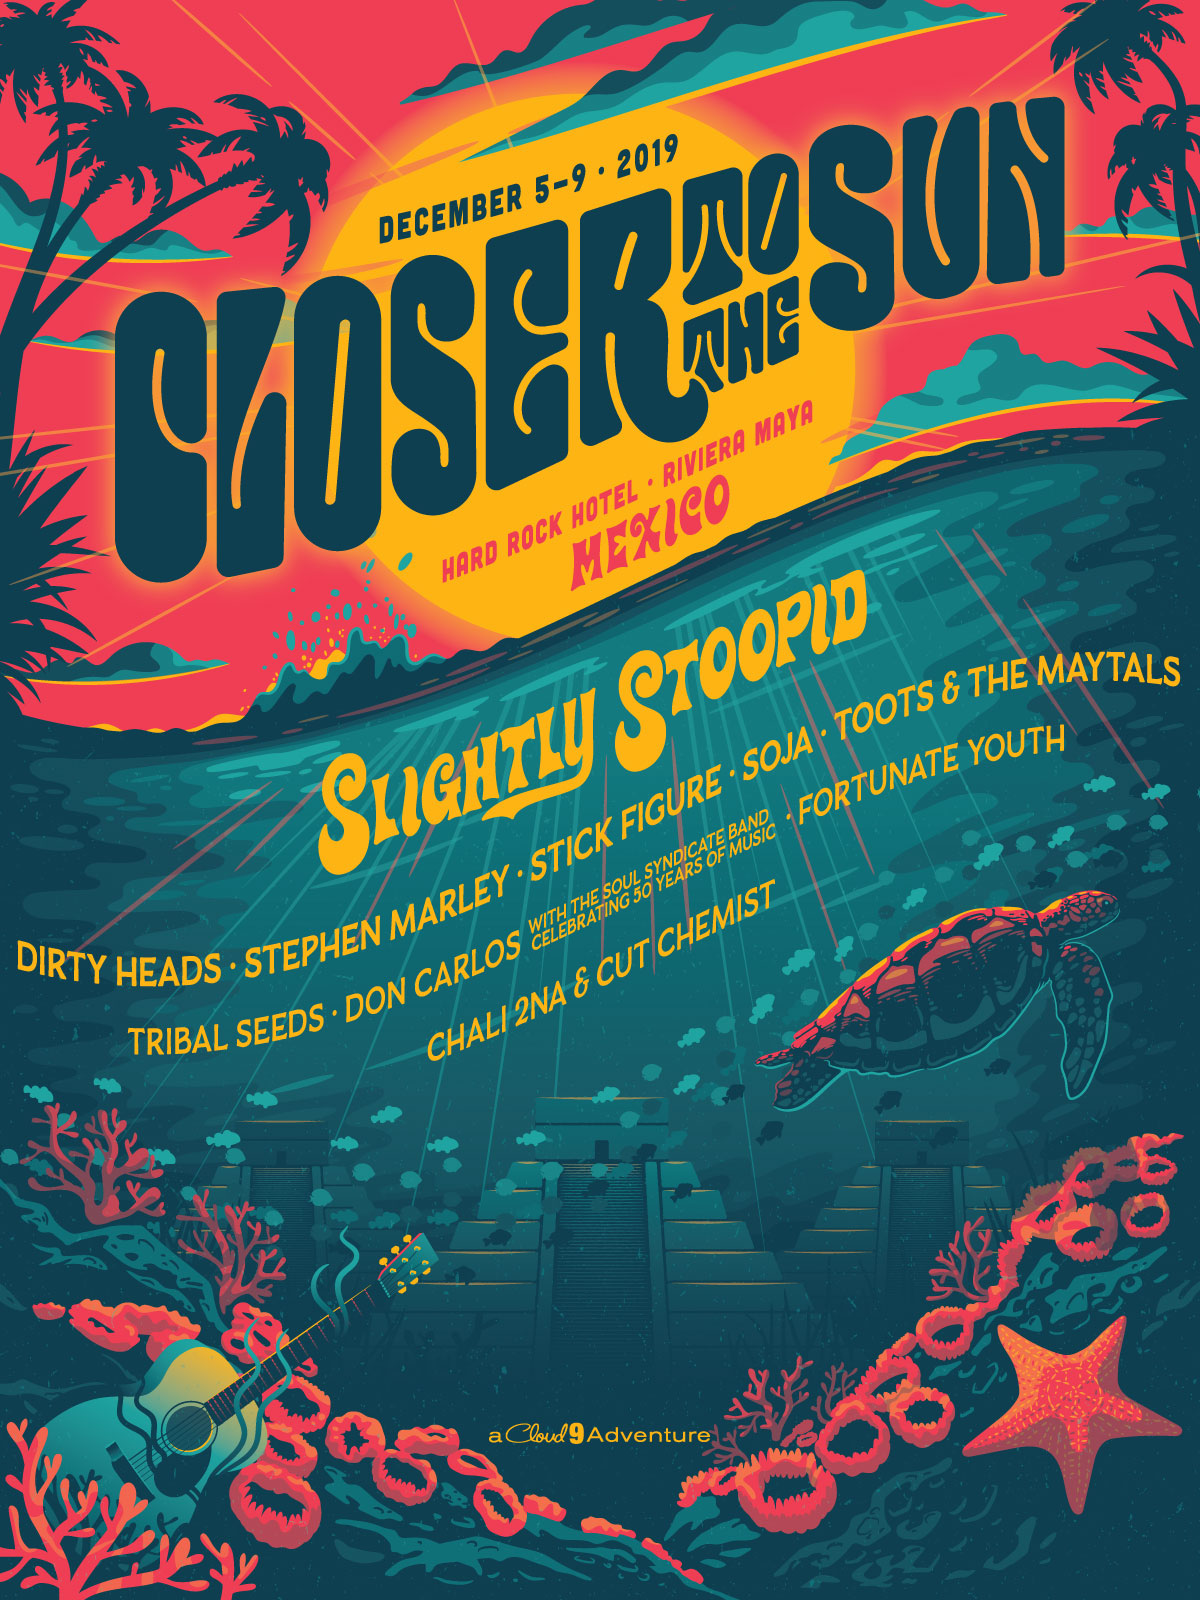 Closer To The Sun December 812, 2022 Slightly Stoopid & Friends